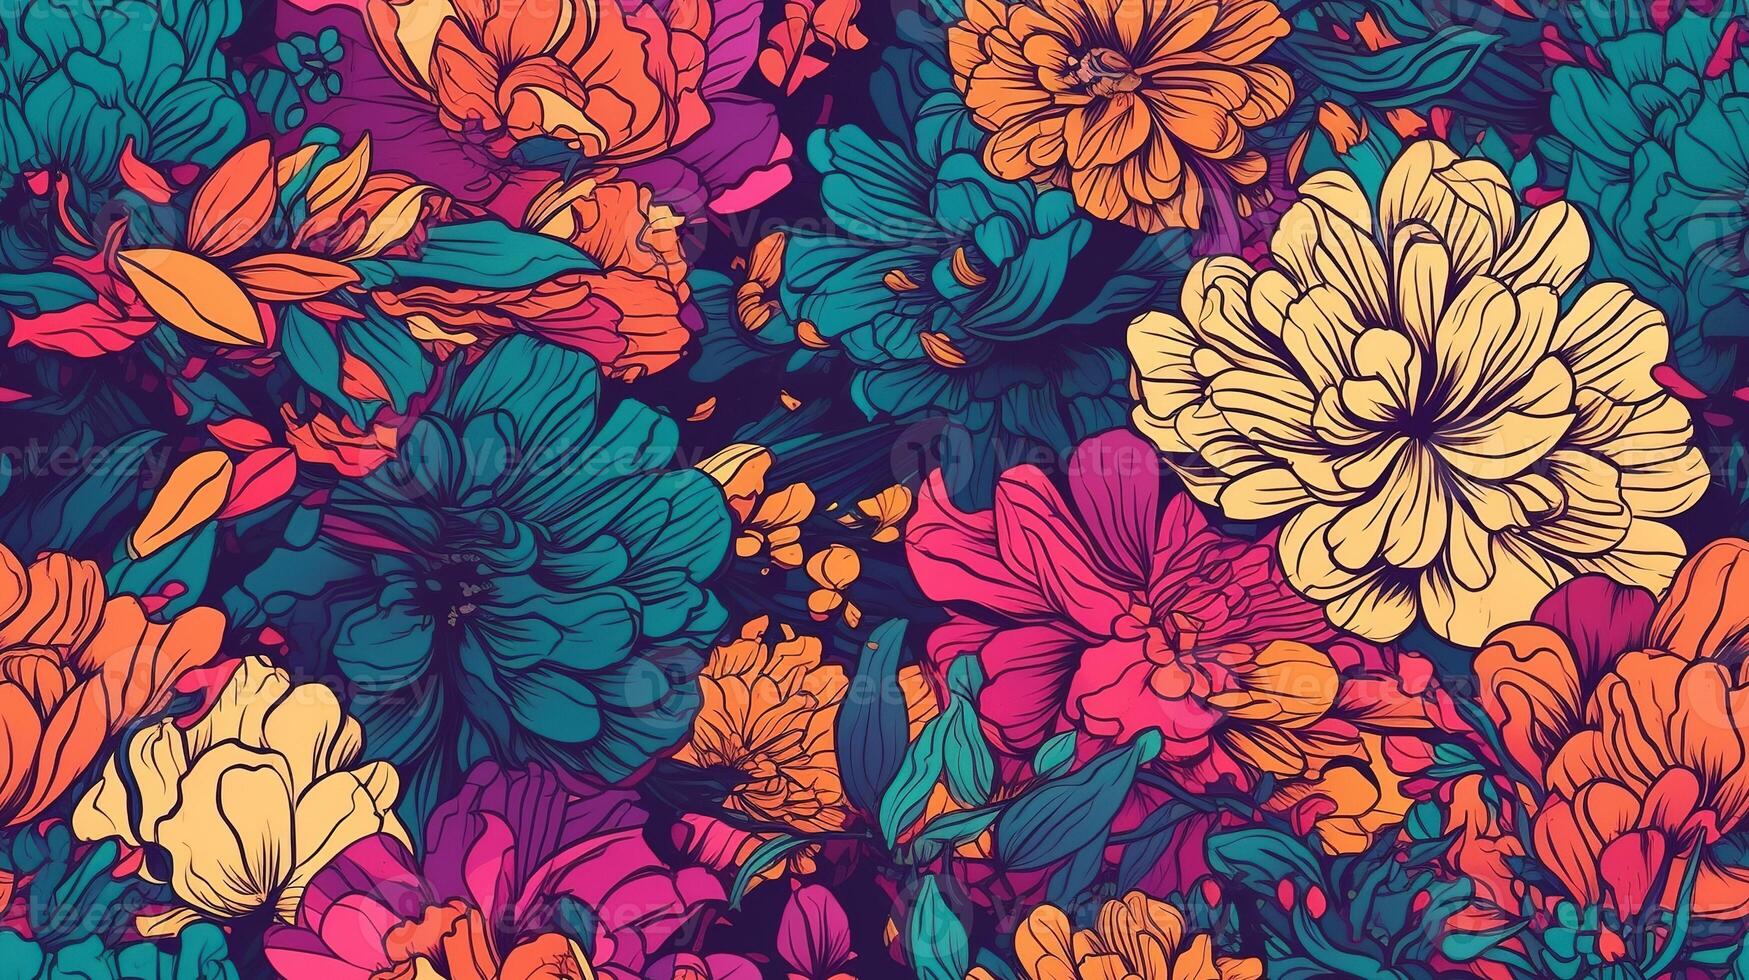 , Floral colorful seamless pattern. Lisa Frank and James Jean inspired natural plants and flowers background, Psychedelic illustration. Foliage ornament. photo